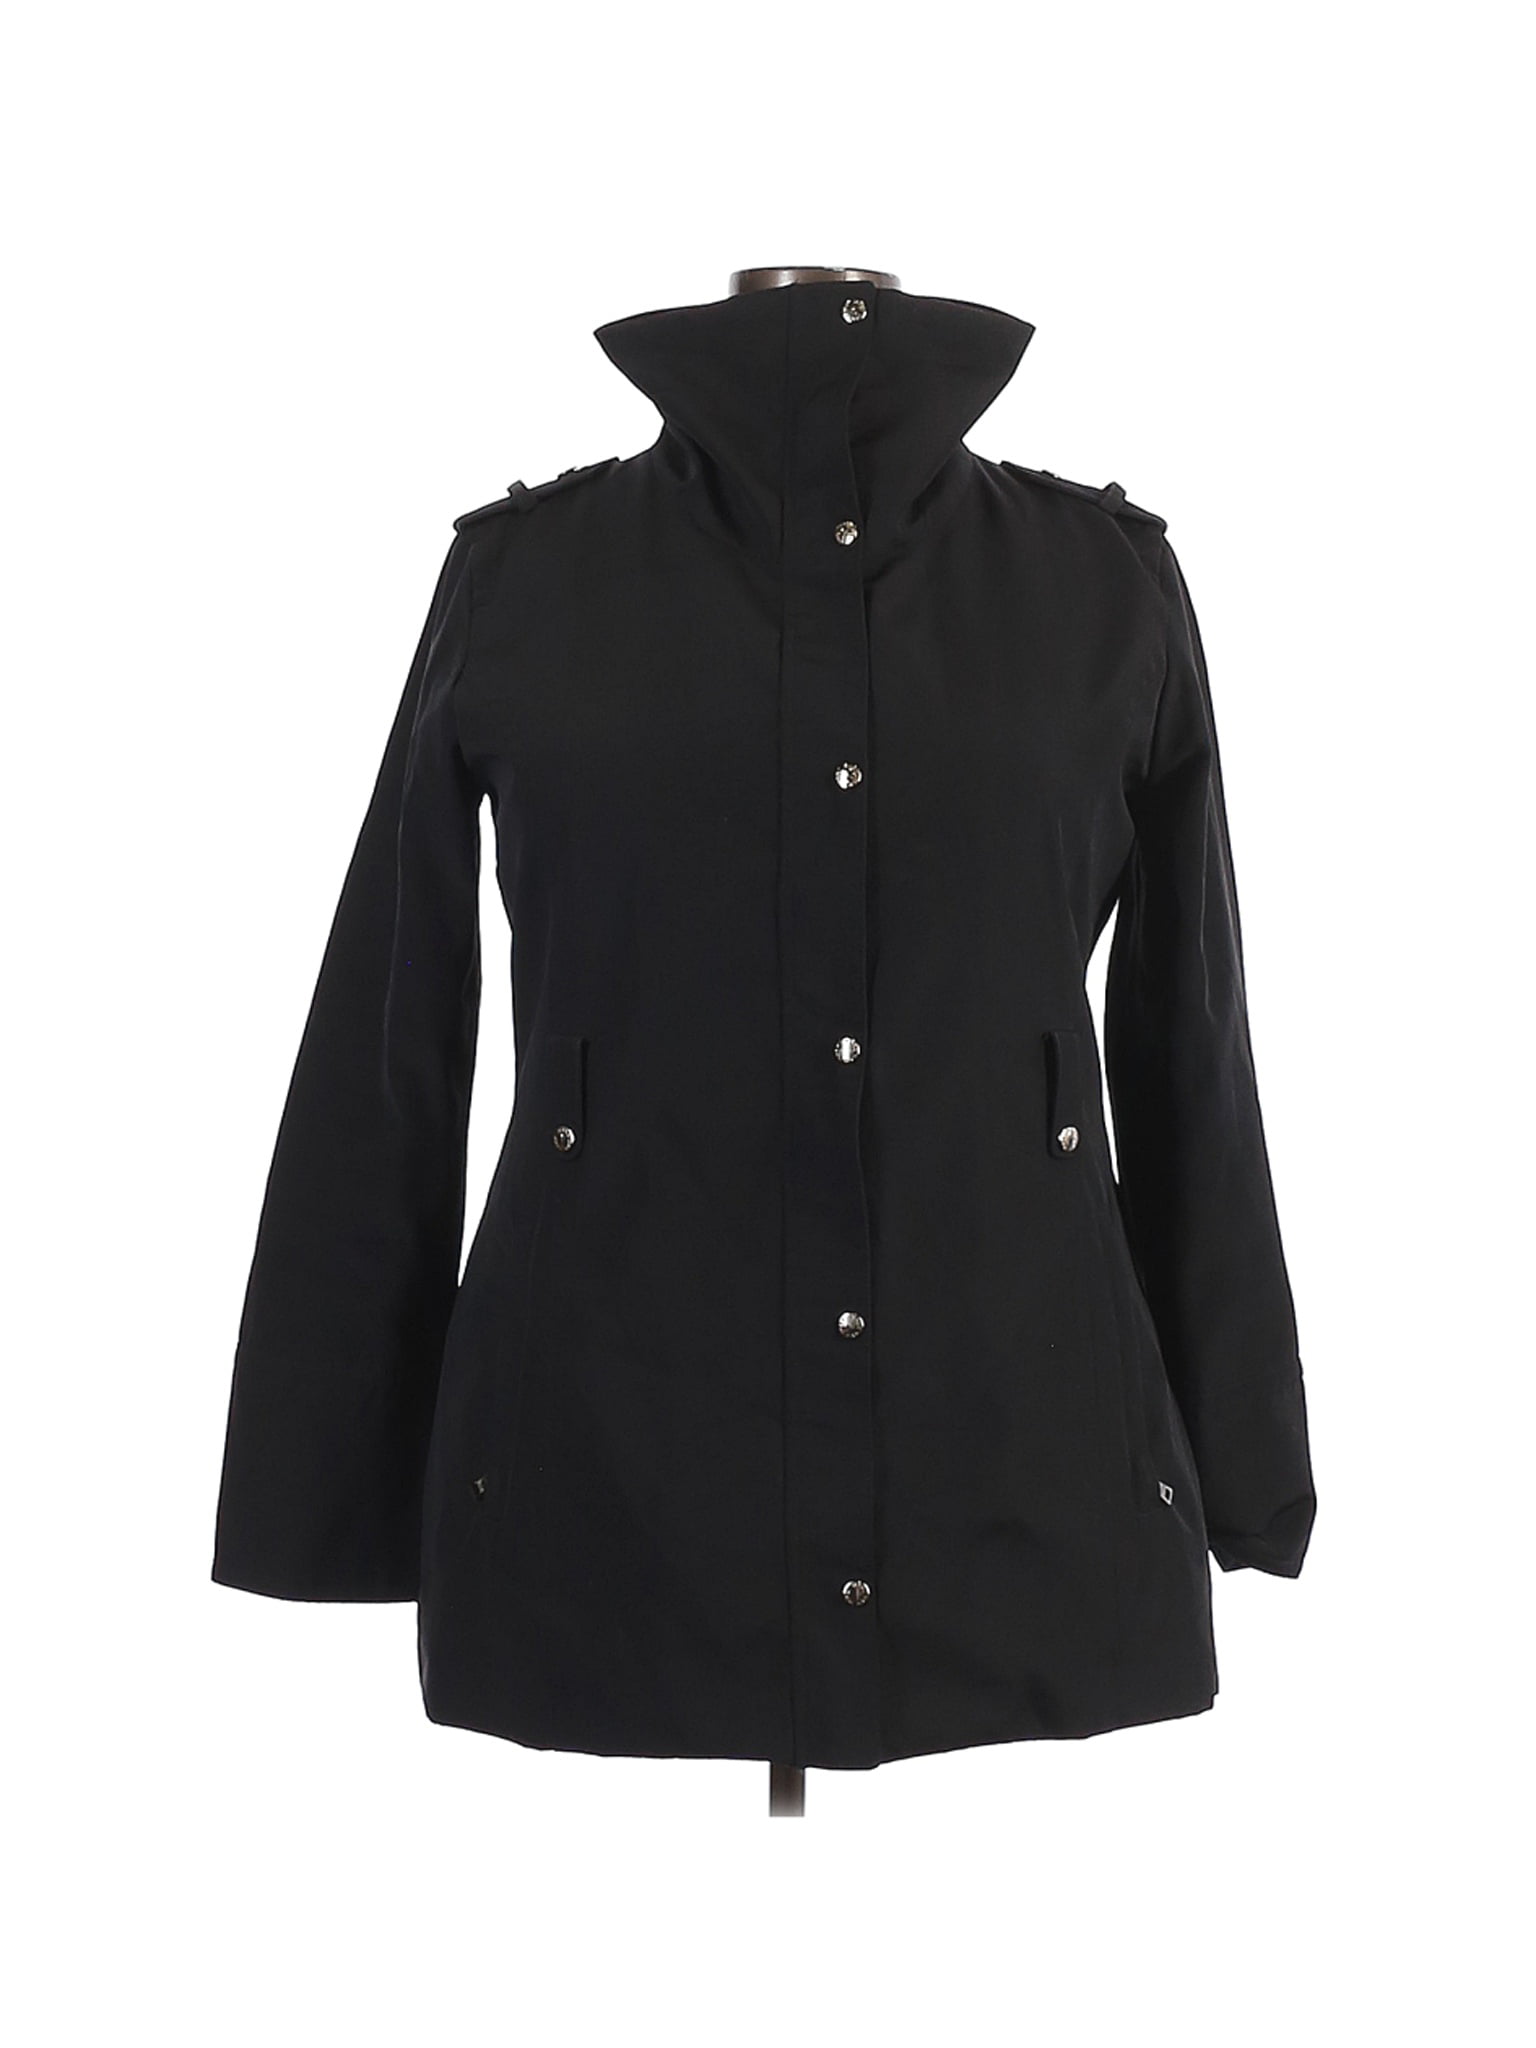 Marc New York - Pre-Owned Marc New York Women's Size XL Jacket ...